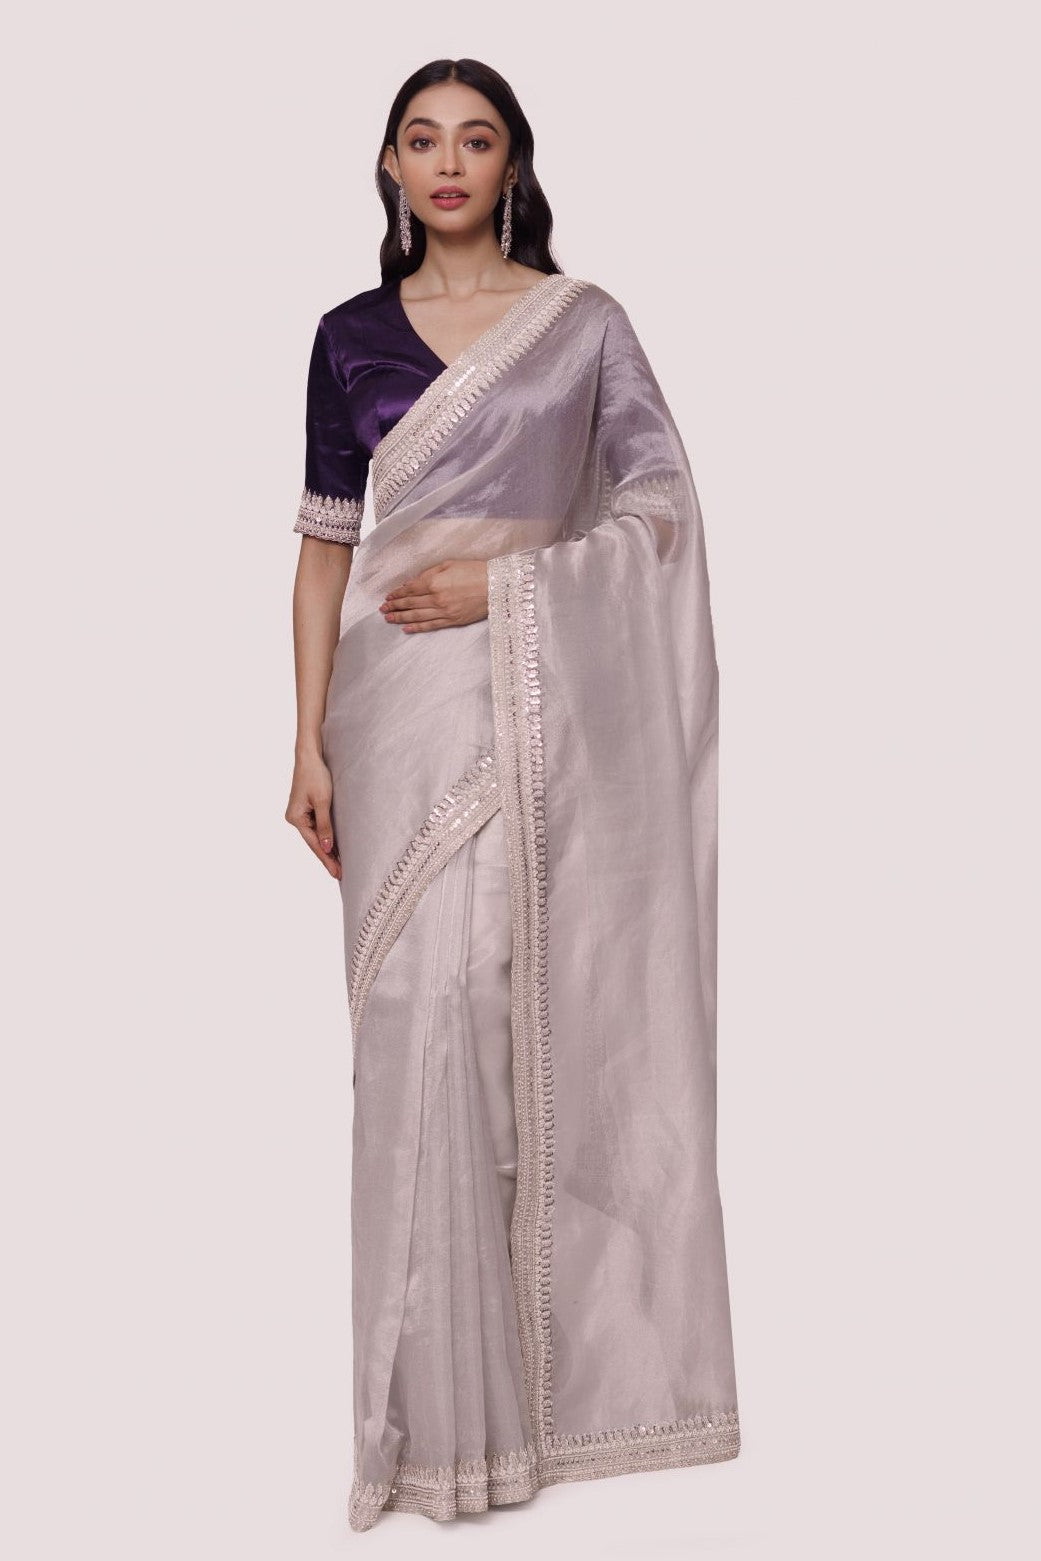 Shop Grey Silk Saree With Contrasting Purple Blouse Online in USA